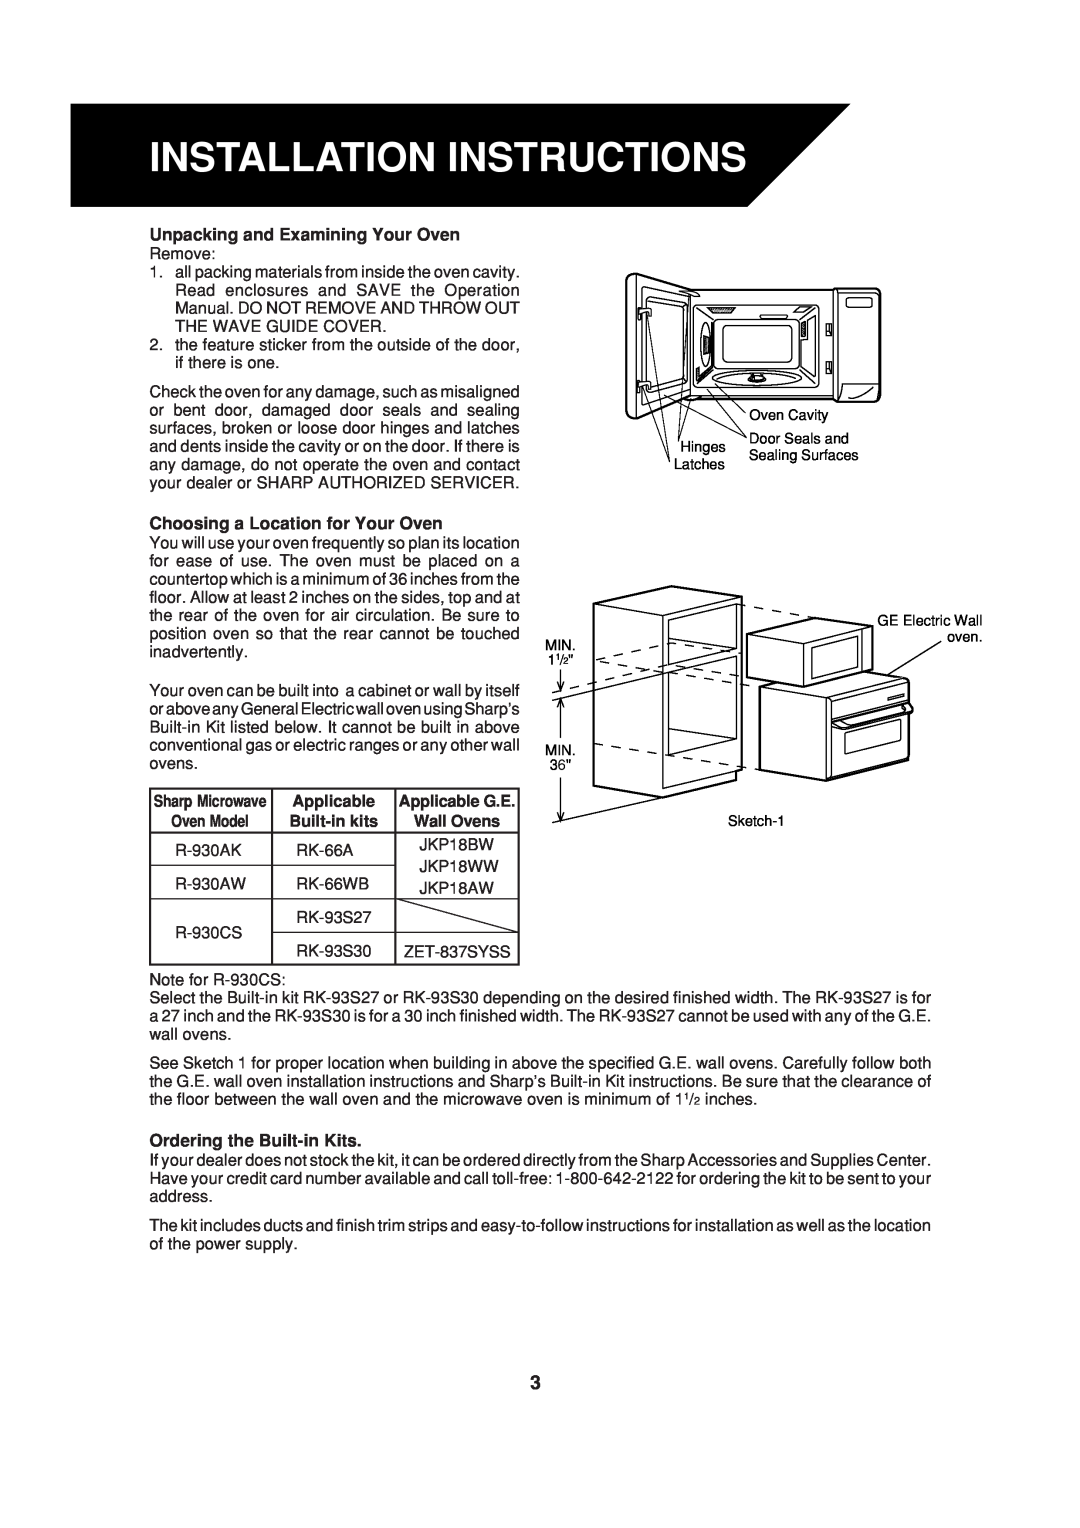 Sharp R-930CS Installation Instructions, Unpacking and Examining Your Oven, Choosing a Location for Your Oven, Applicable 